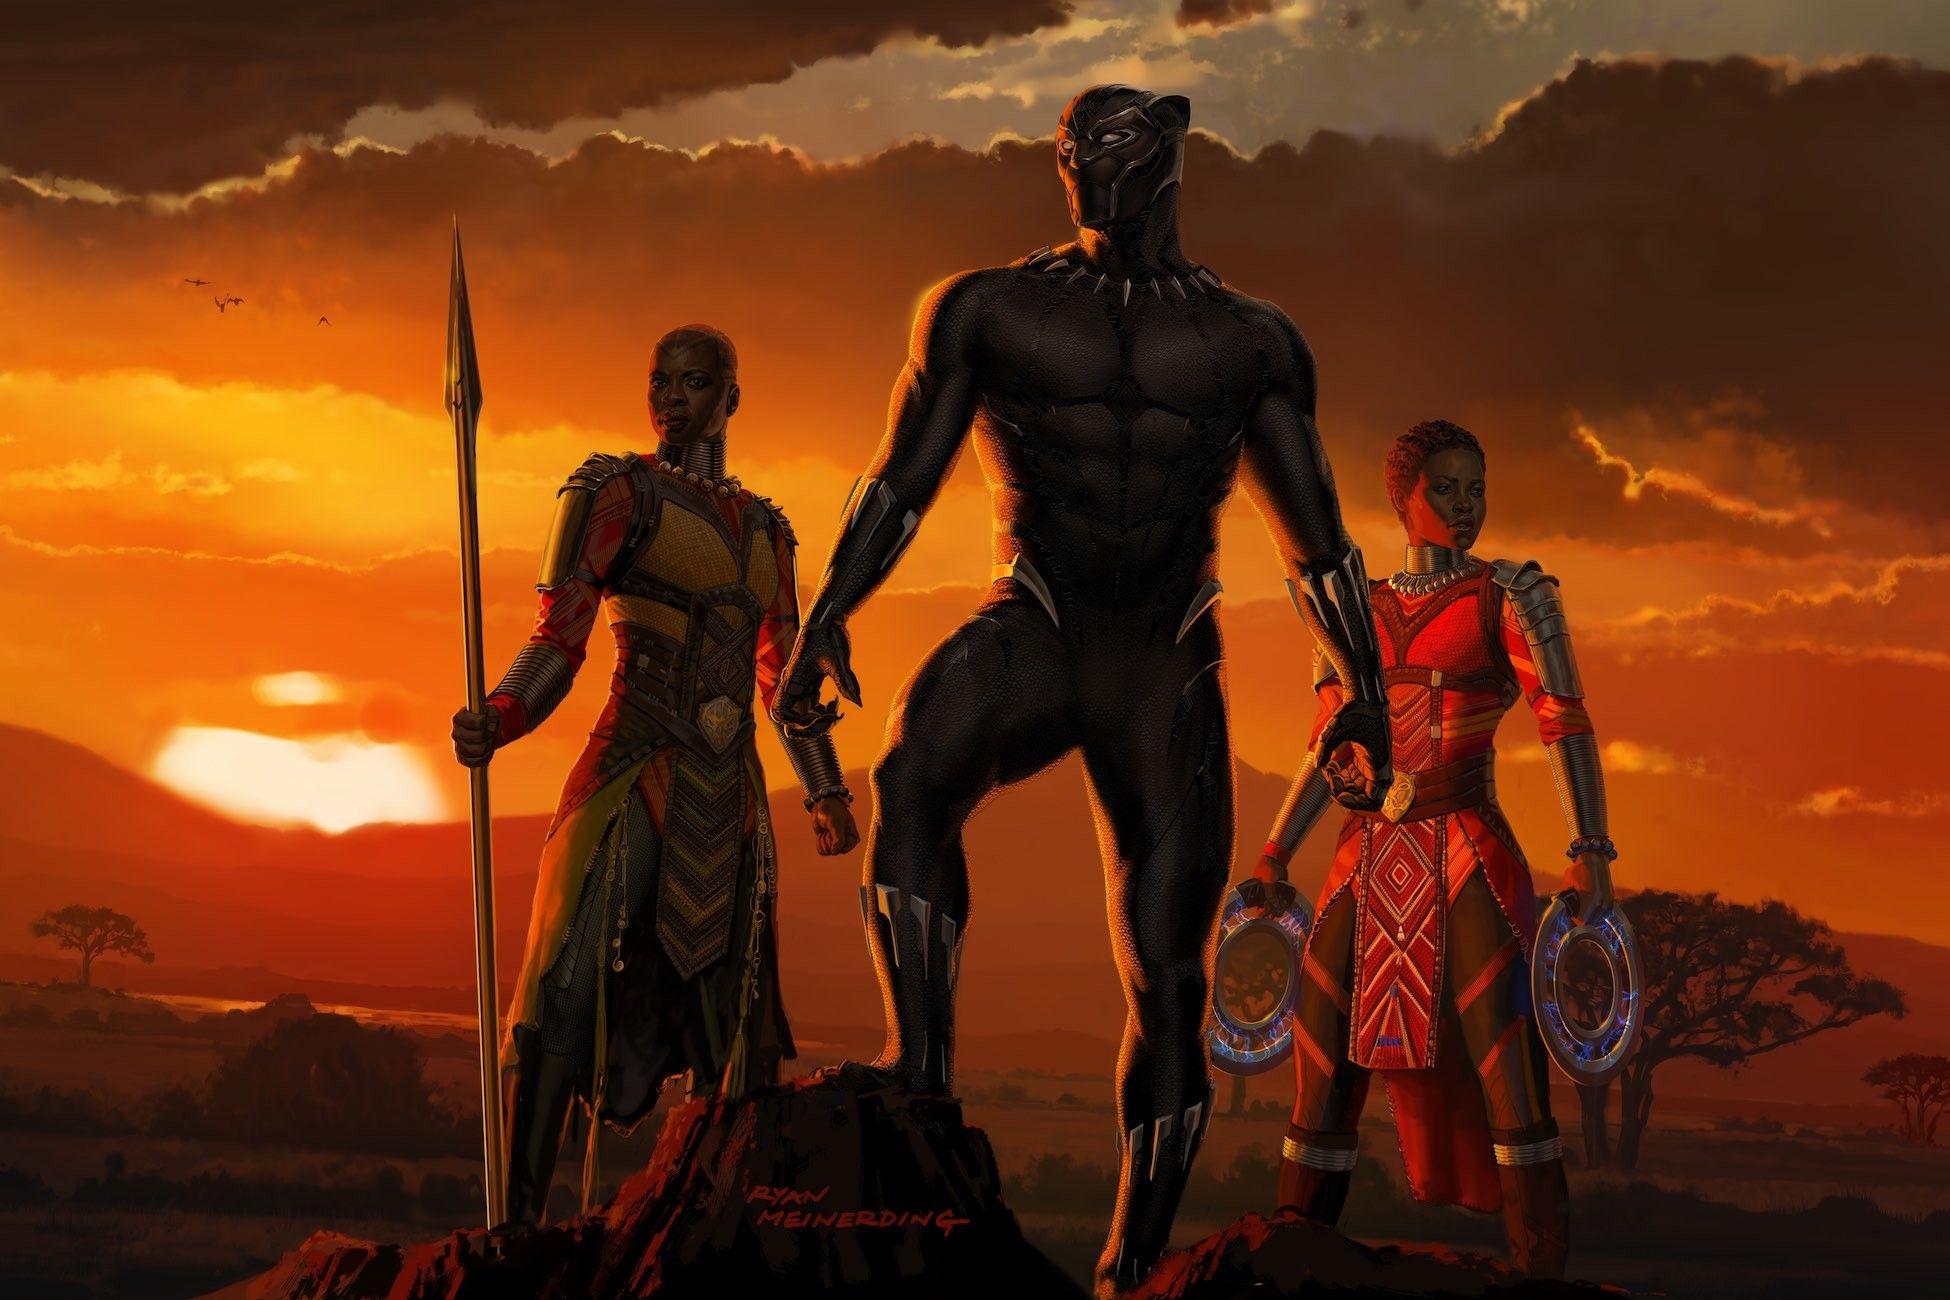 Black Panther: Wakanda Forever download the new